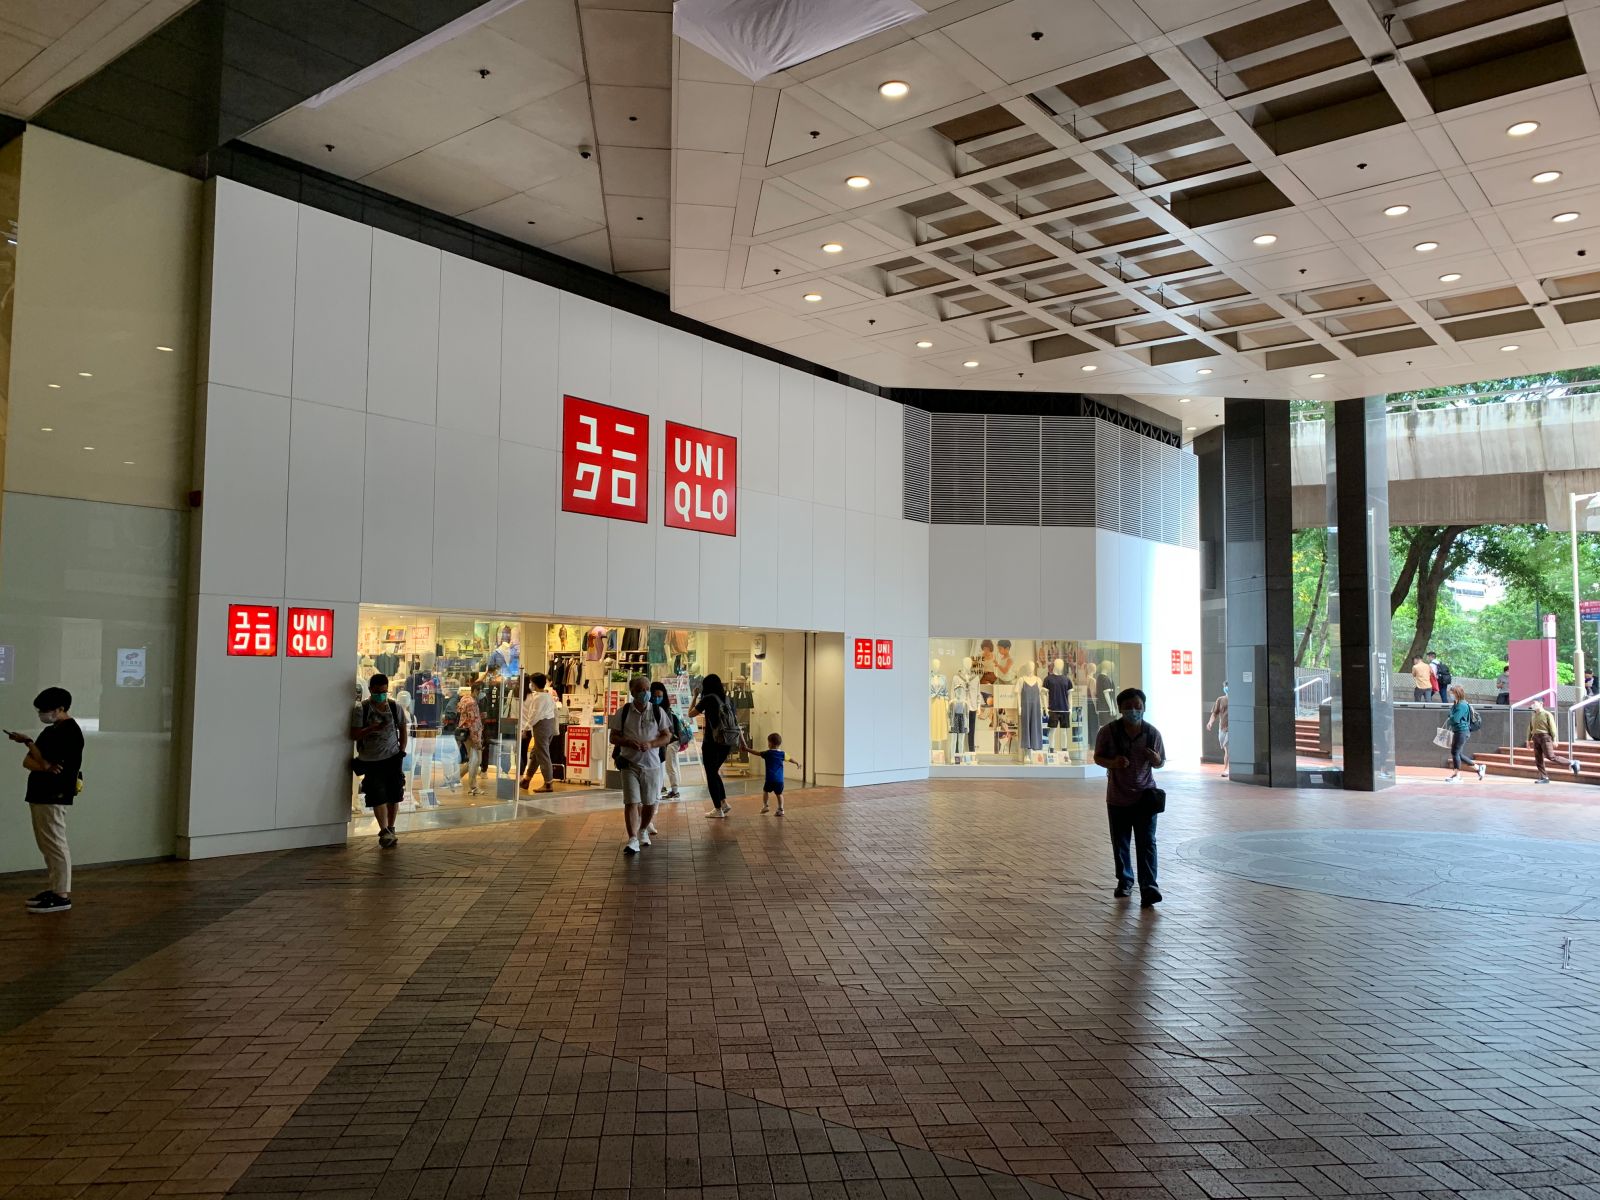 Then you will see the store, Uniqlo, and turn right